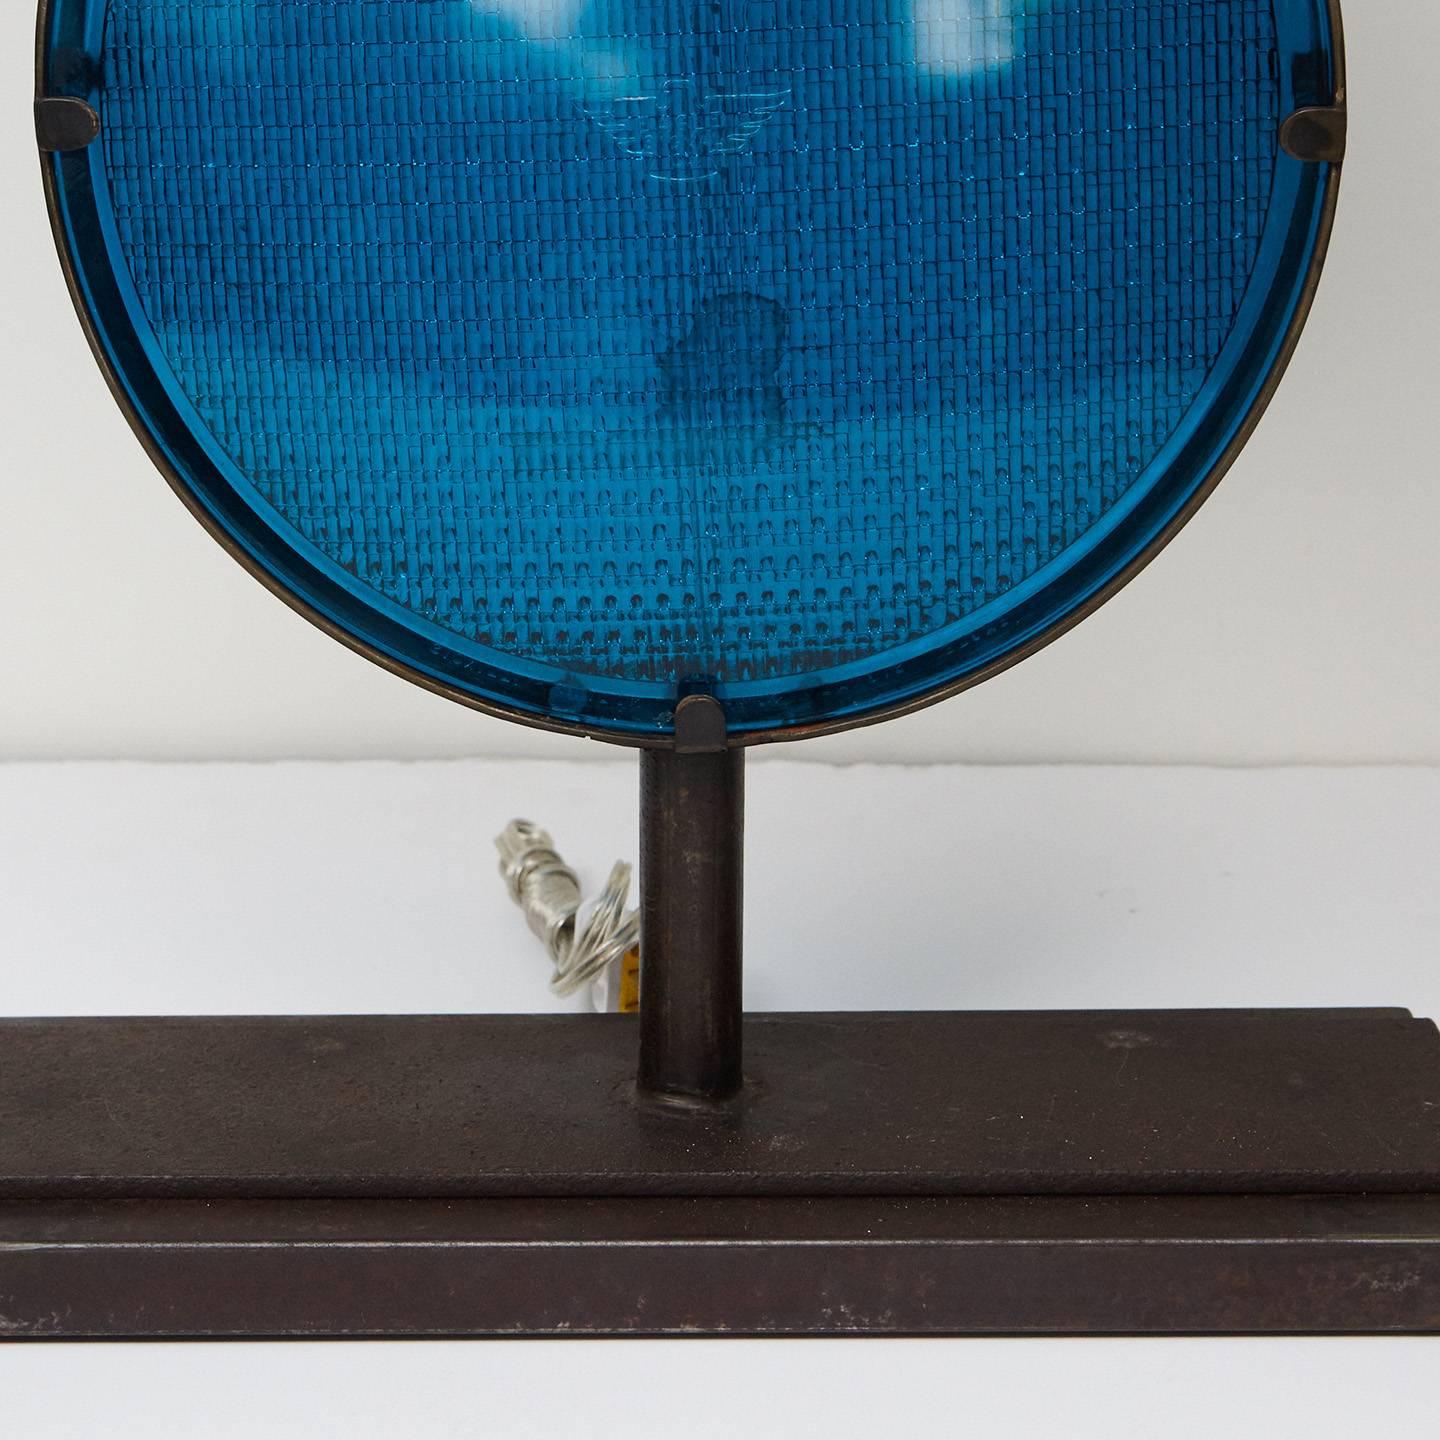 This lamp is made from two railroad light lenses set in a circular steel frame on a rectangular base. The lenses are from a railroad light from the first half of the 20th century. The convex blue lenses have are textured on one side with smooth